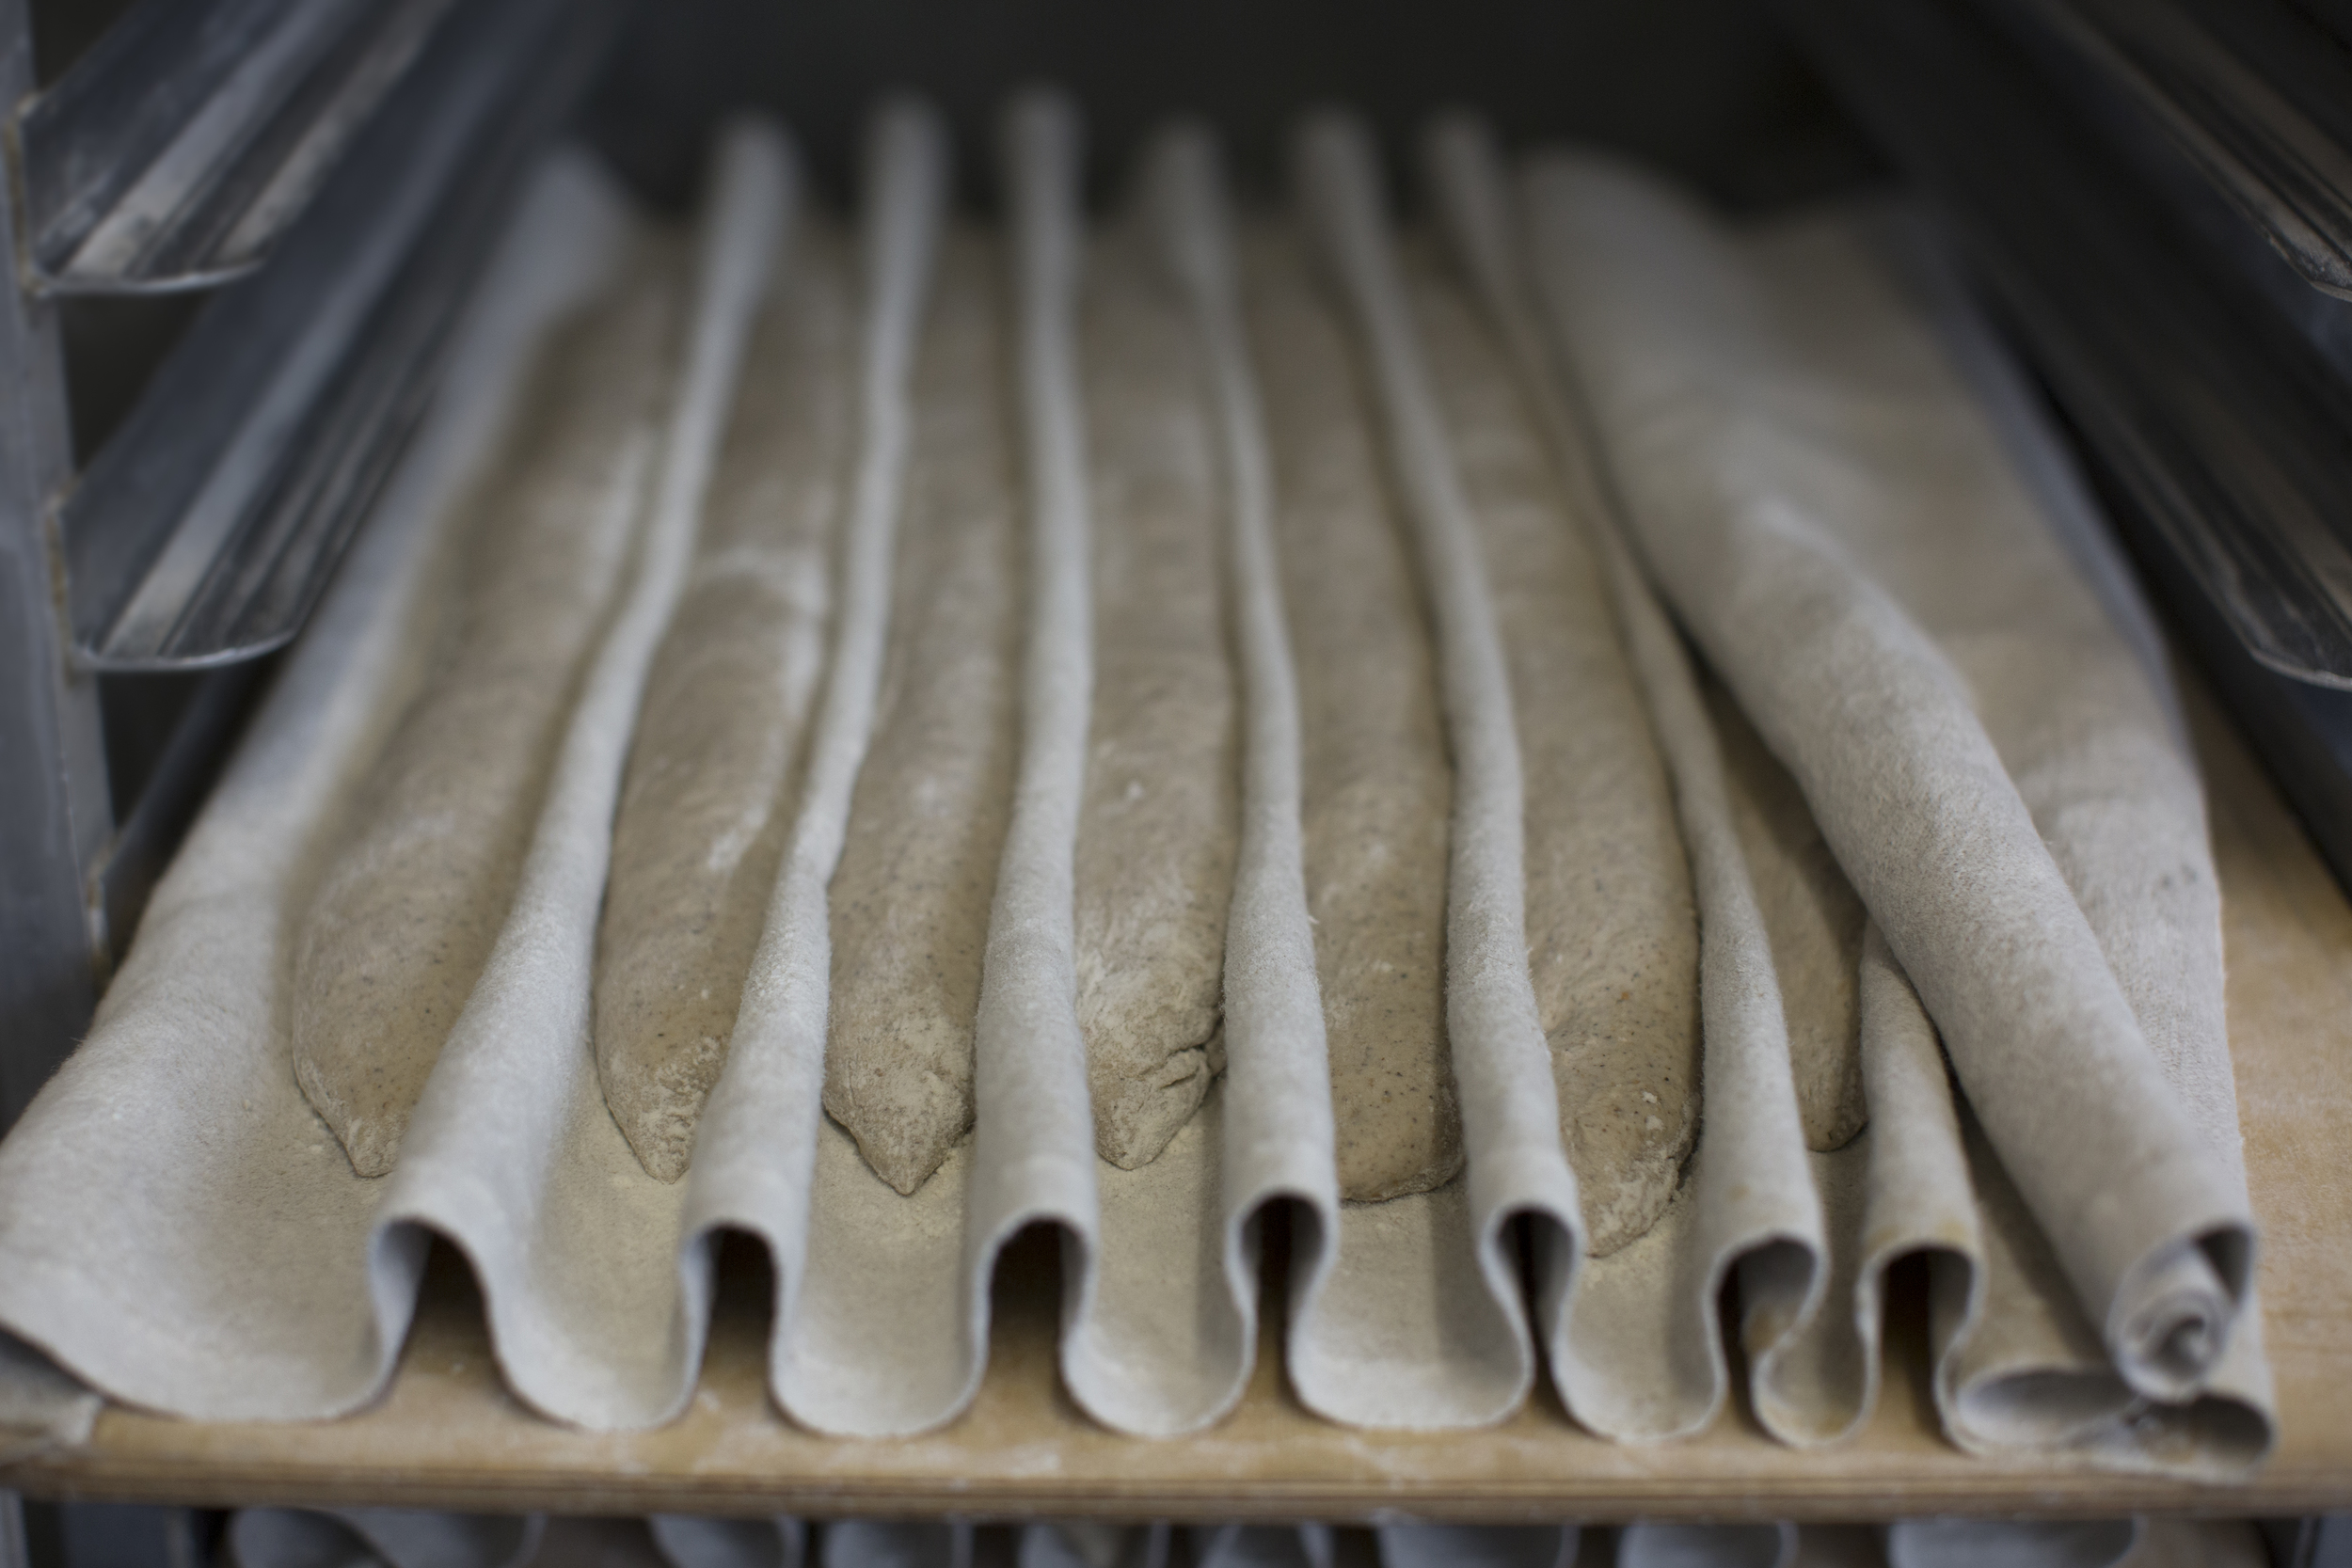 buckwheat baguettes proofing on a couch in the runner &amp; stone bakery